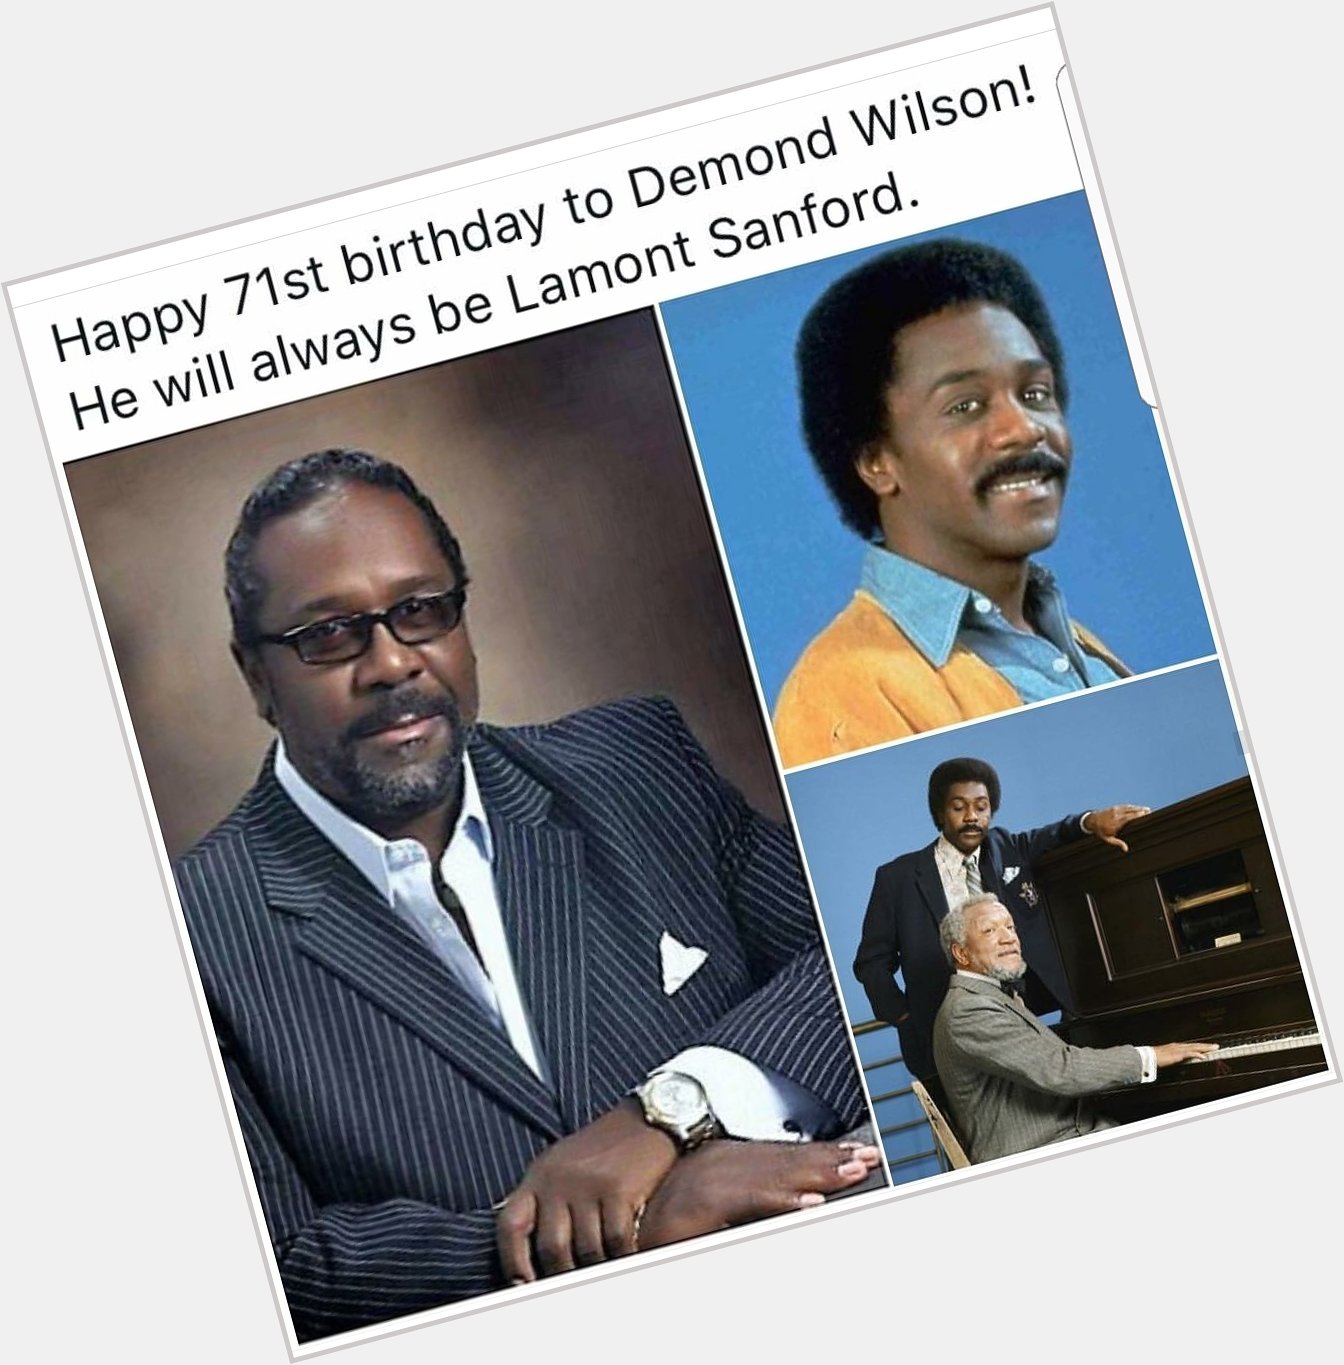 My mama got my middle name from him. Happy Birthday Demond Wilson. 